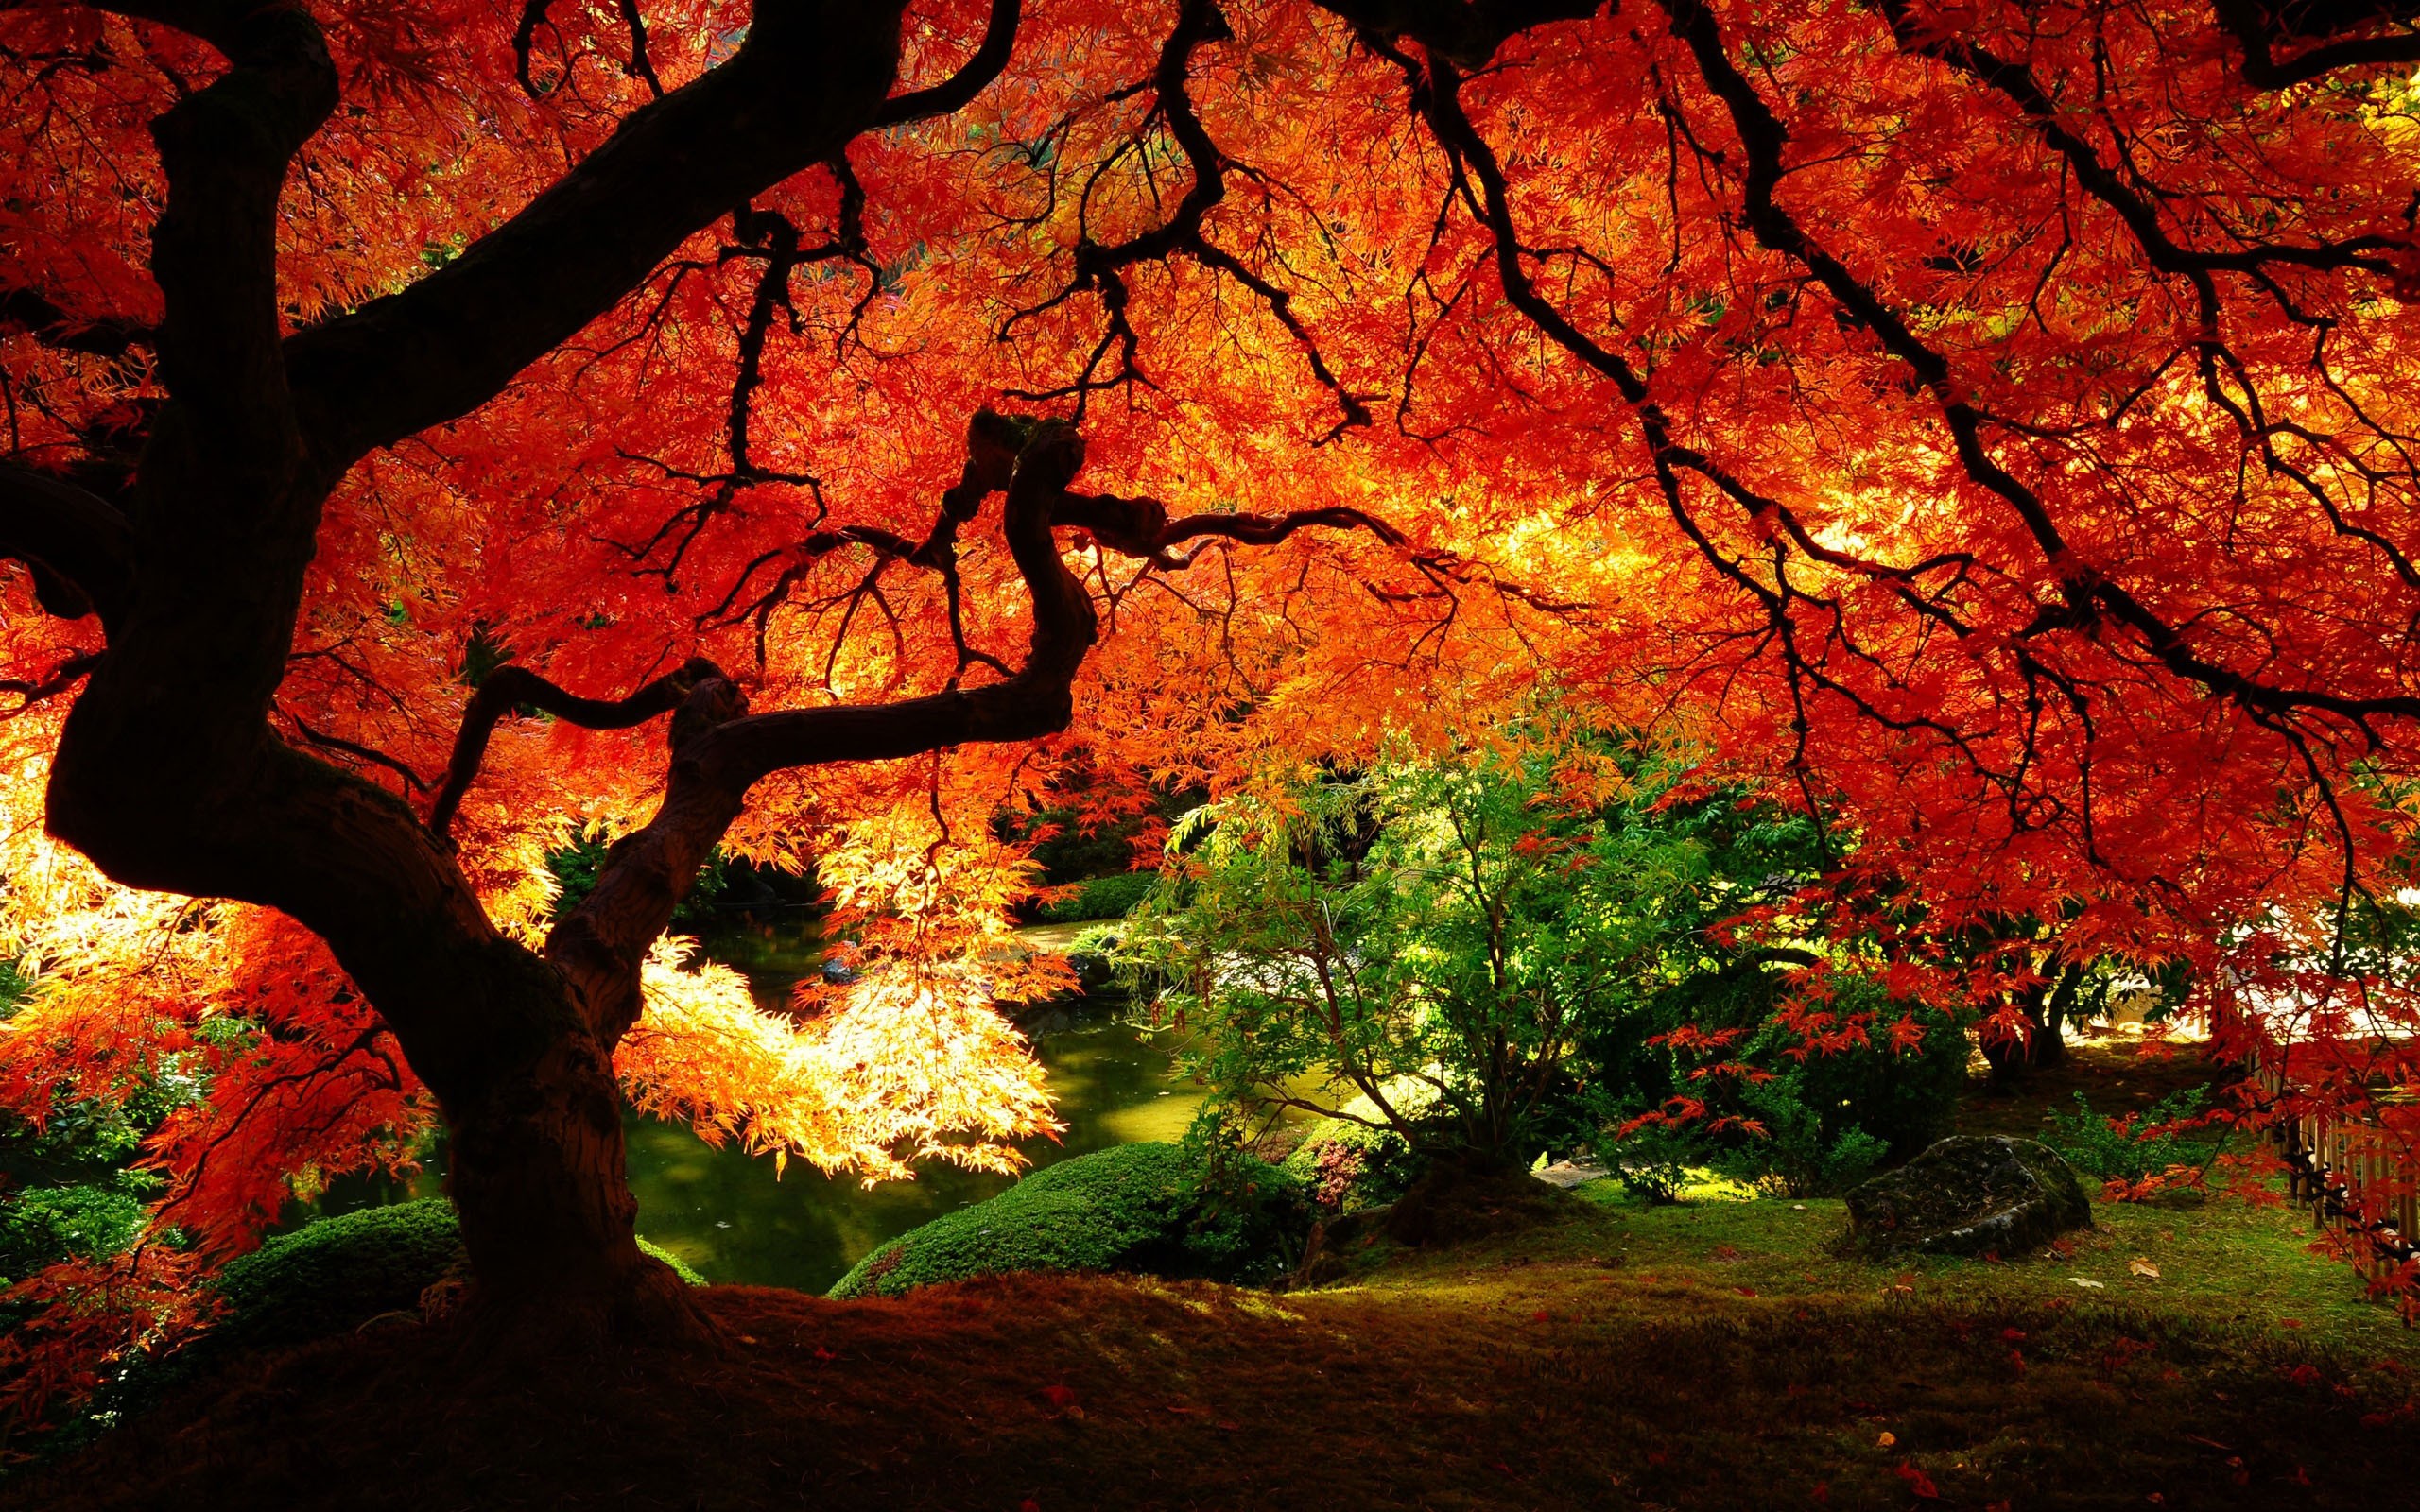 General 2560x1600 red leaves red garden trees plants